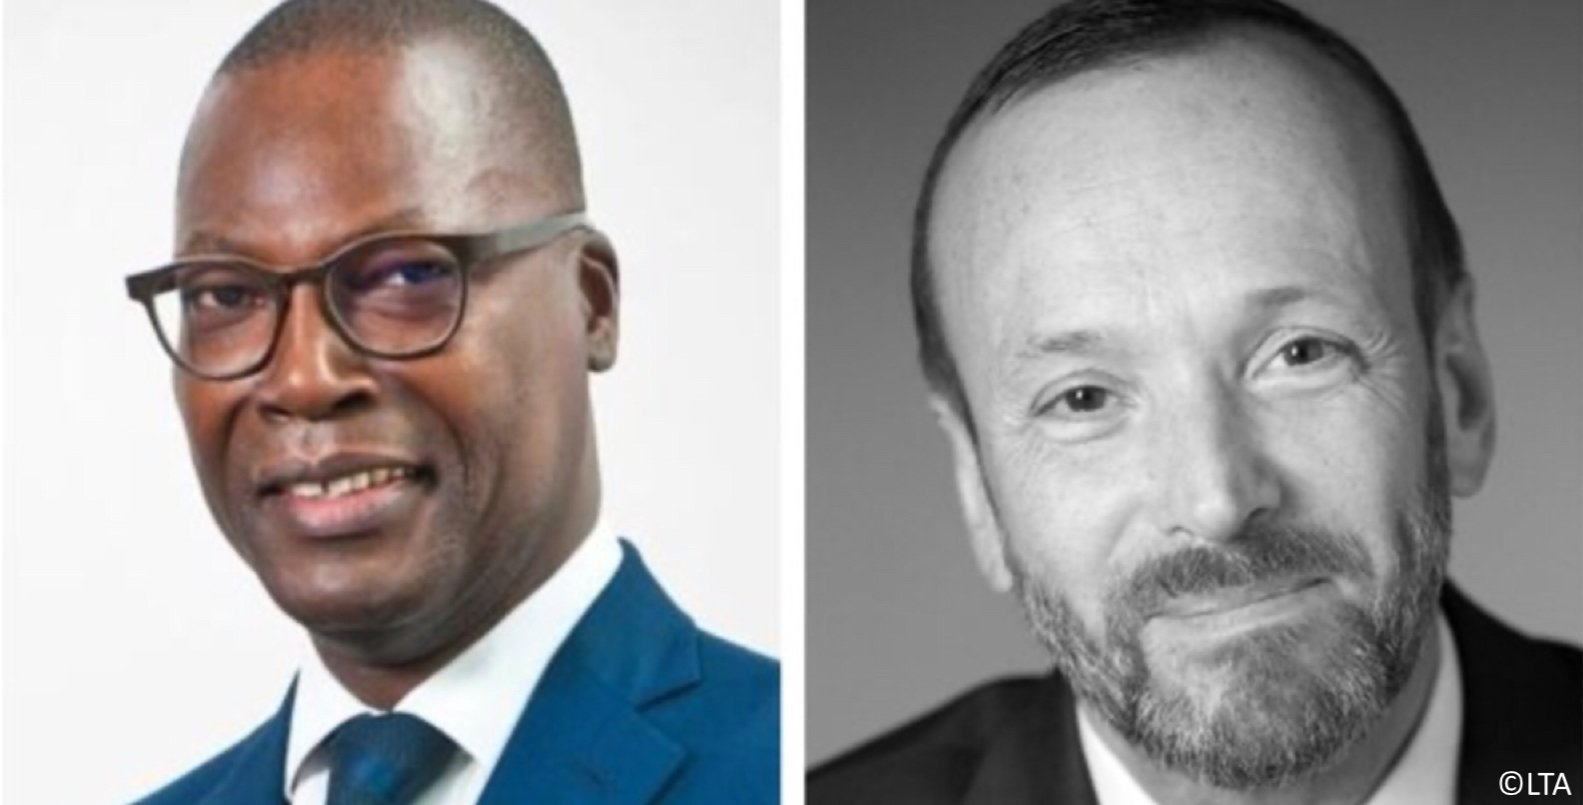 Wilfrid Lauriano Do Rego & Patrice Fonlladosa – « Les Afriques n’attendent plus ! »